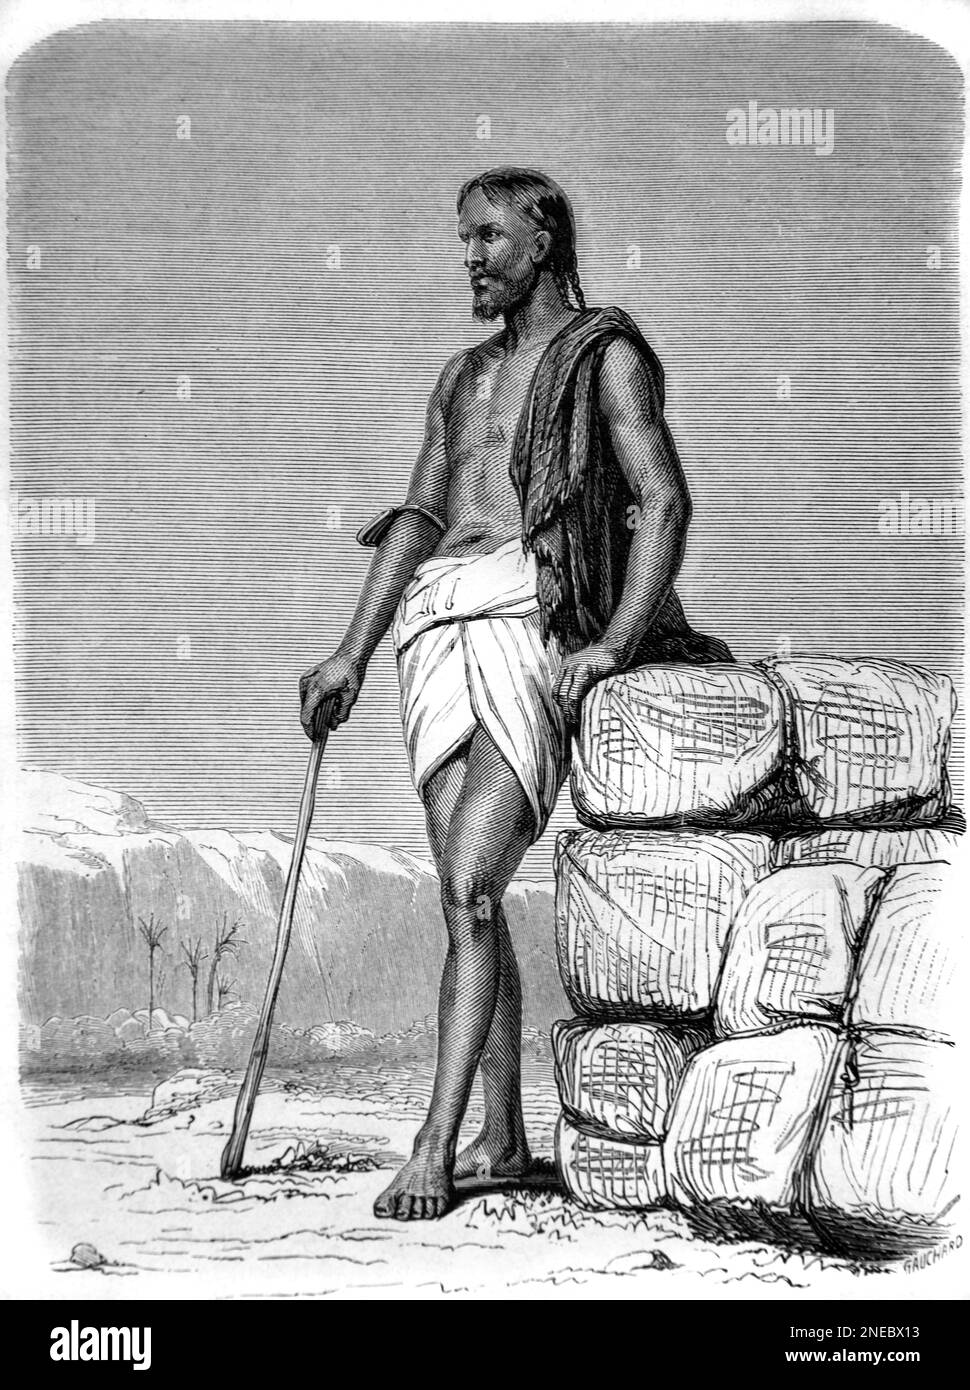 Full-length Portrait of a Baggara Man or Chadian Arab, with Walking Stick or Herding Stick, a Mixed Nomadic Group from the Sahel in North Central Africa, particularly South Sudan and Chad, Africa. Vintage Engraving or Illustration 1862 Stock Photo